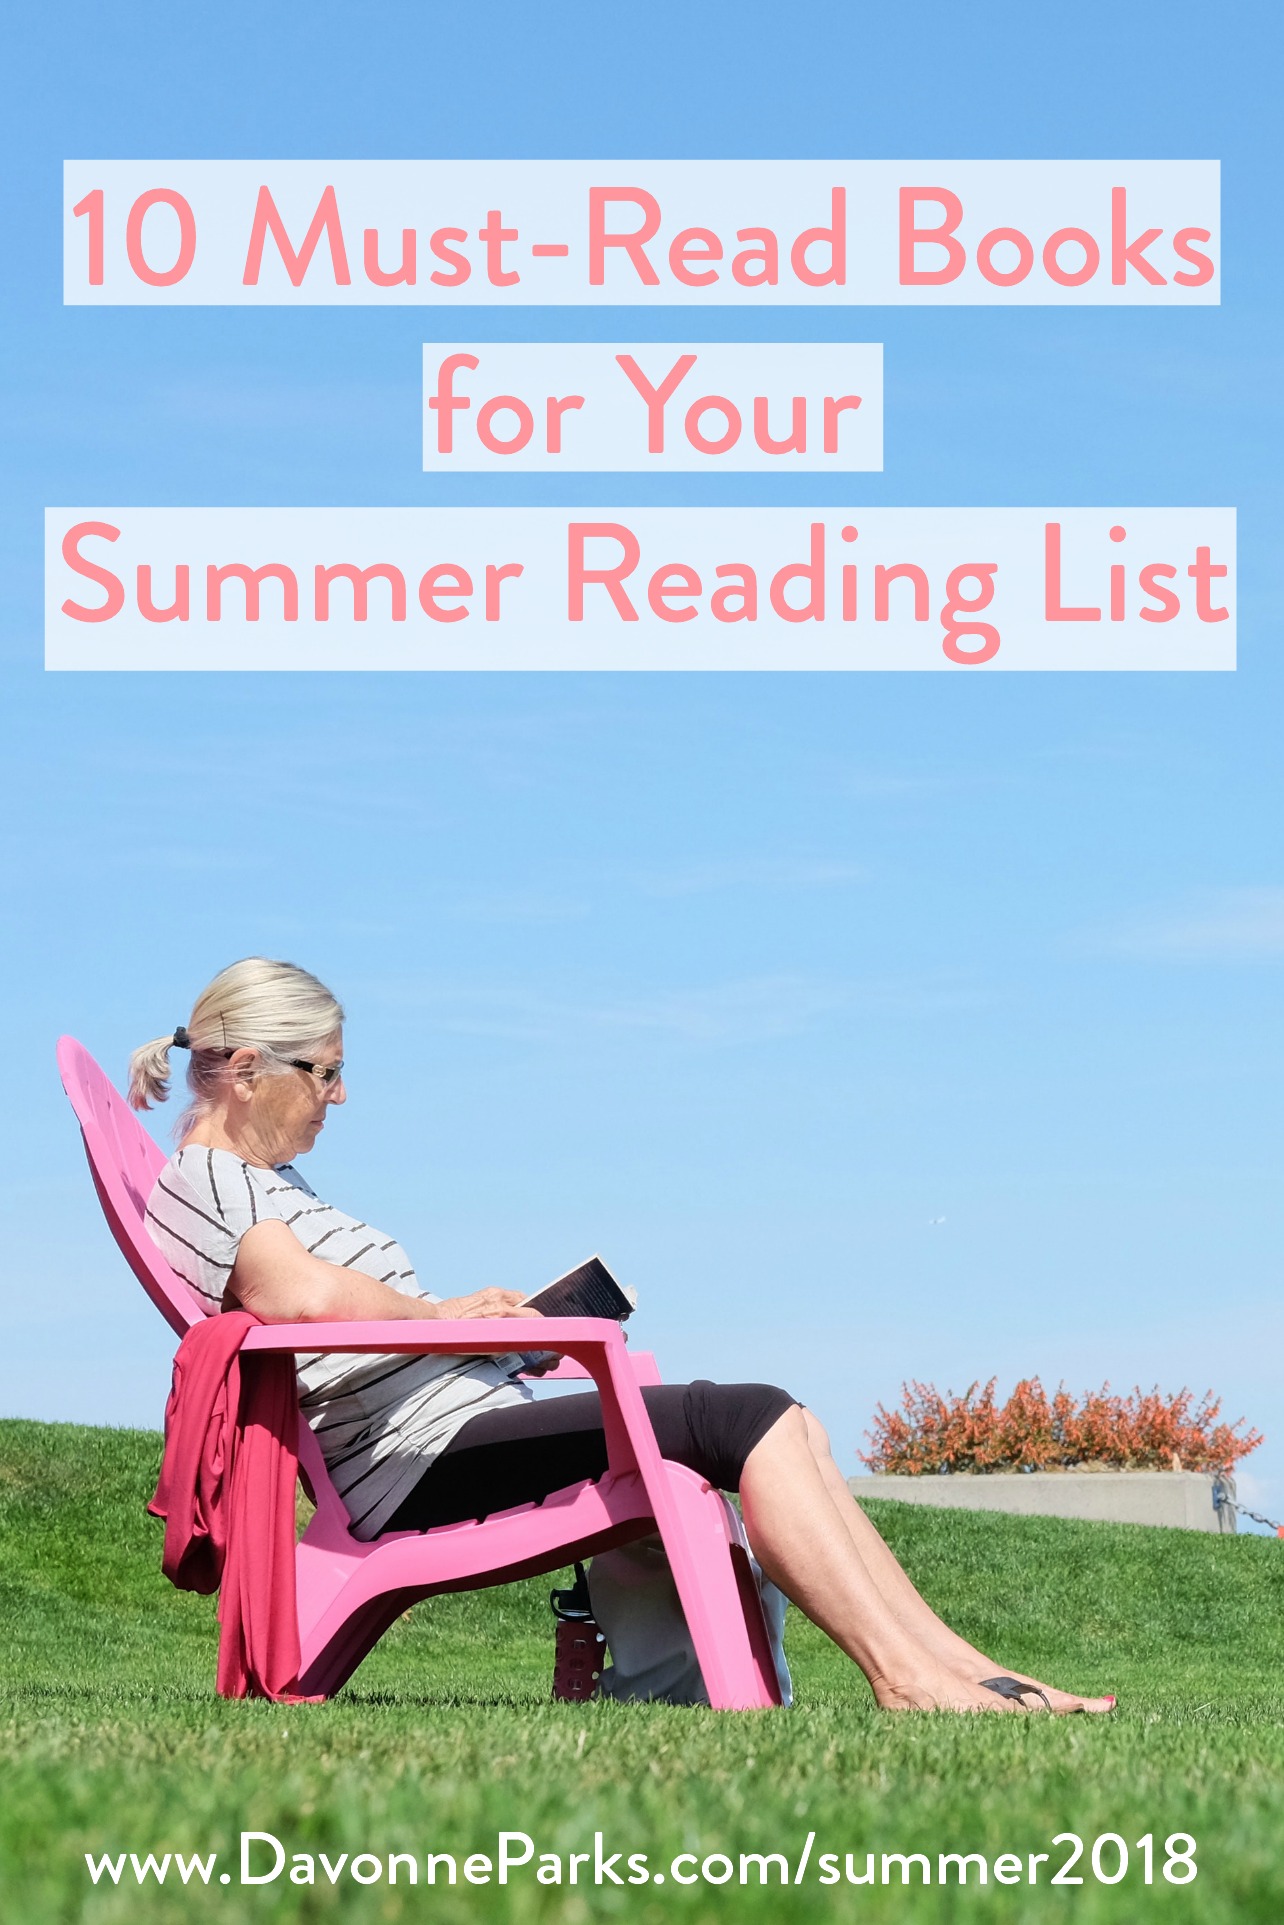 My 10 Favorite Books from 2017 (Perfect for your 2018 Summer Reading List!)